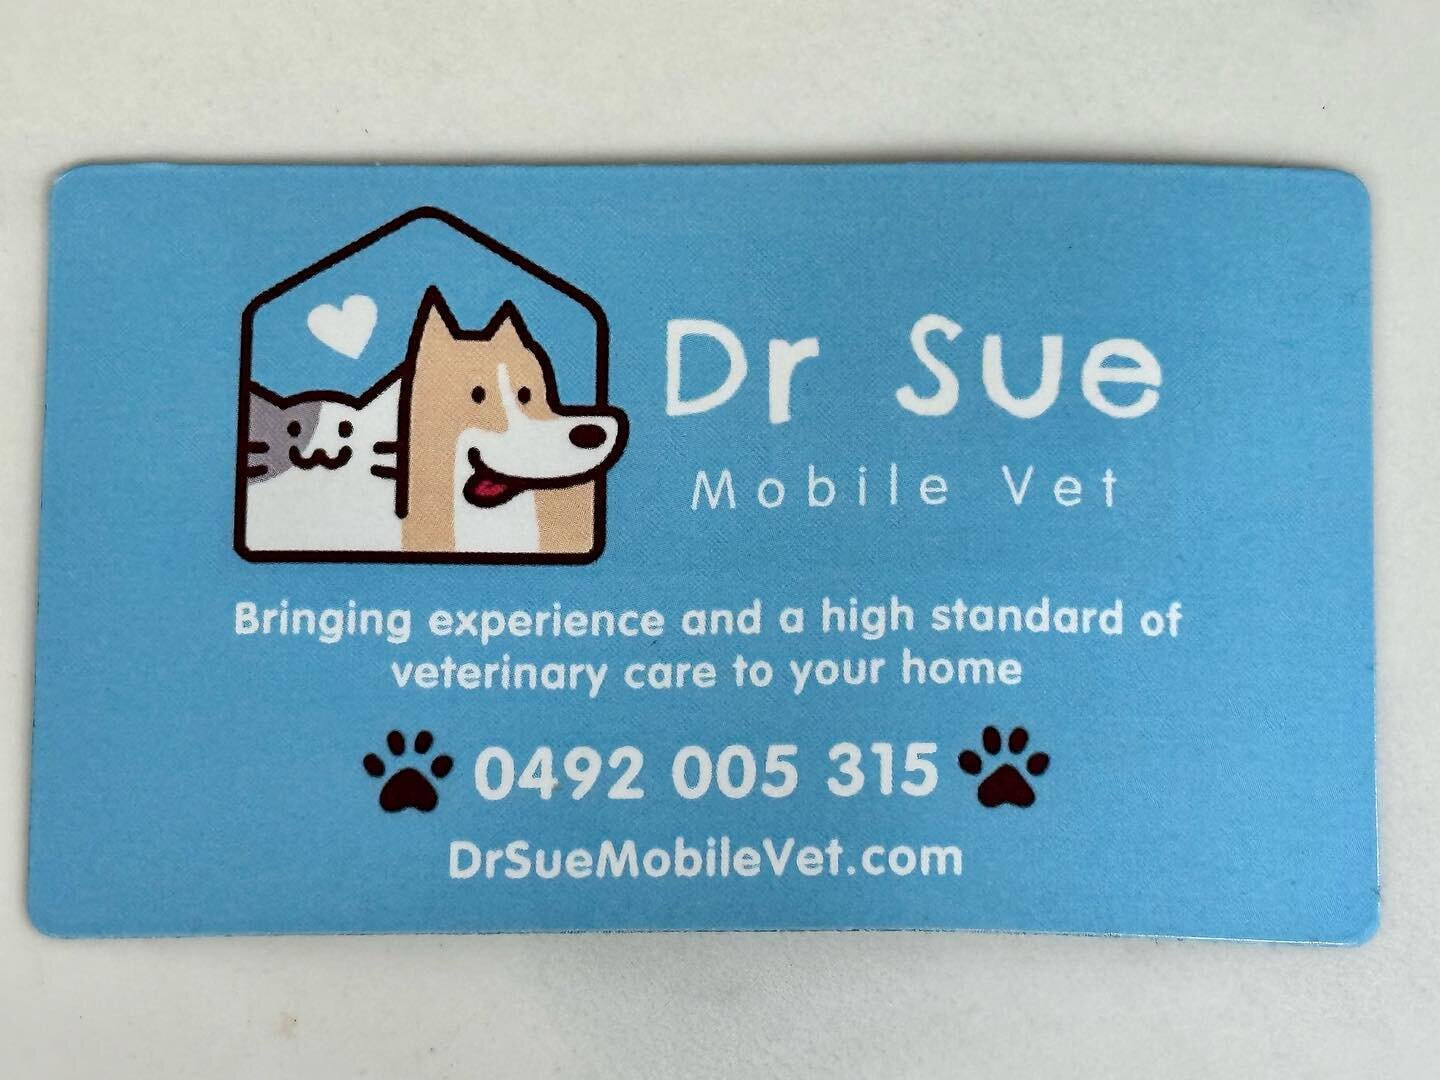 This mobile vet was recommended by a friend of mine, so I thought if ever you can&rsquo;t get to a vet, she may be a good contact to have